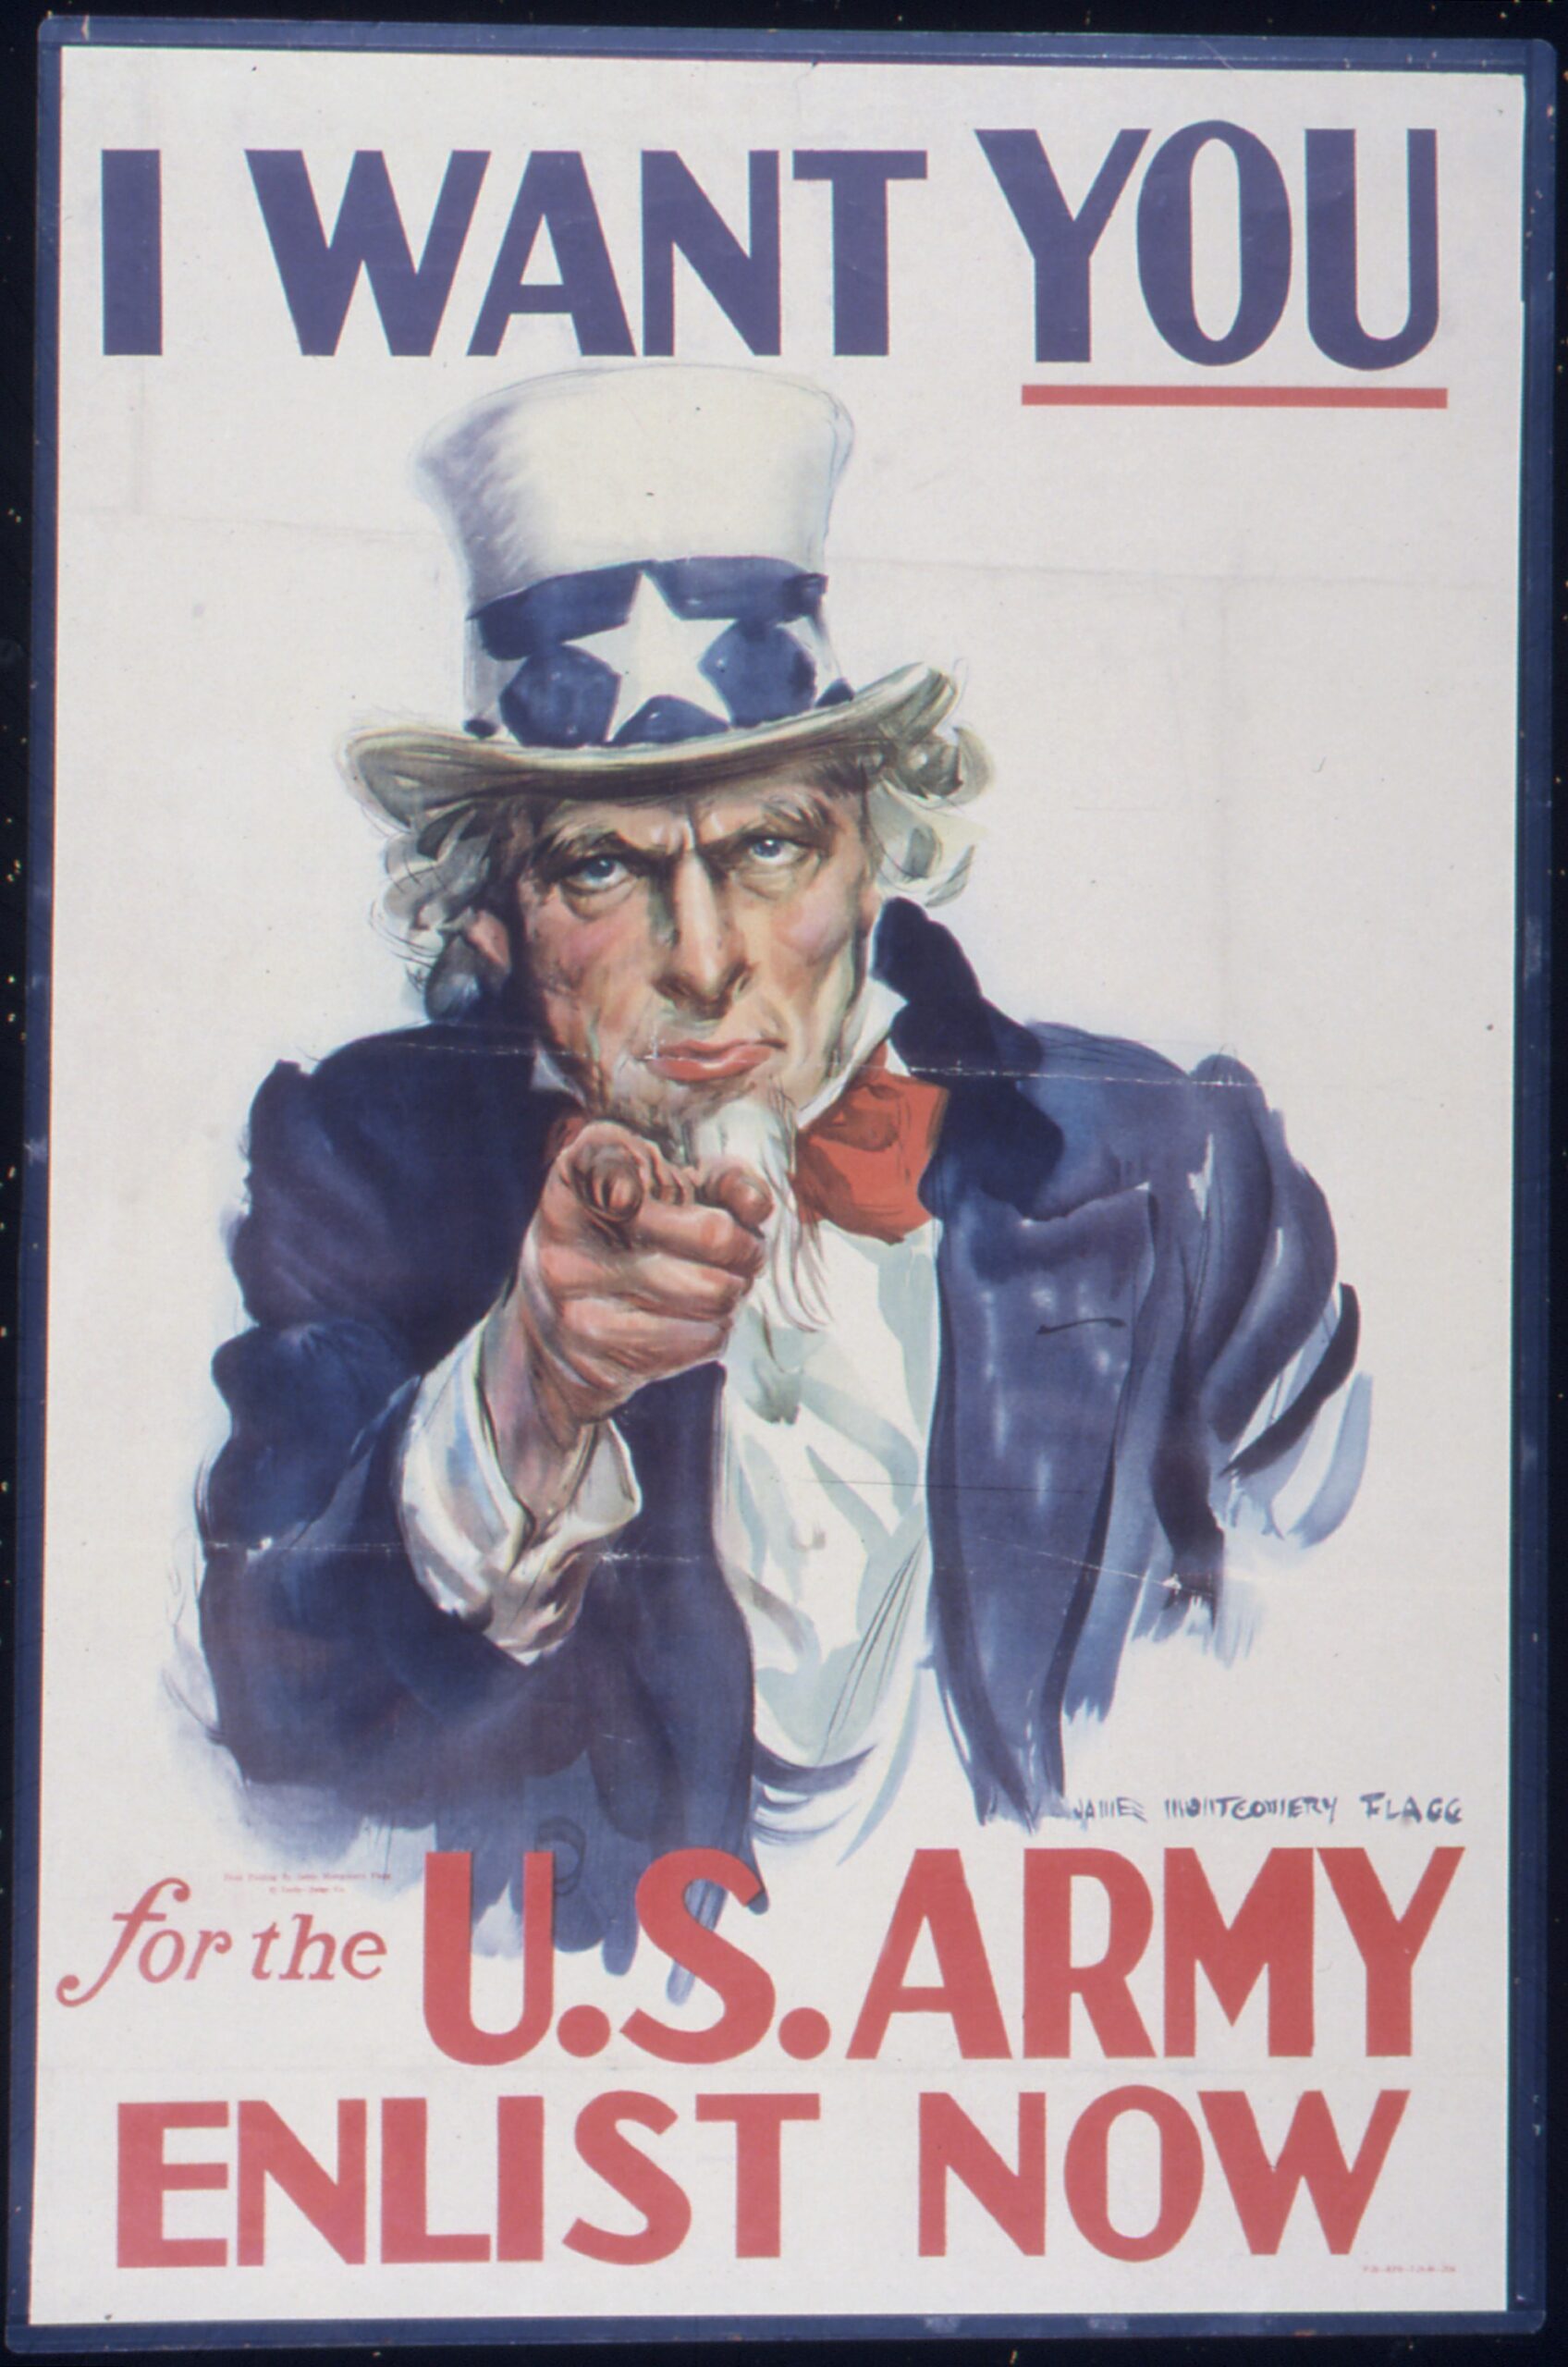 Army recruiting poster, designed by James Montgomery Flagg, 1917